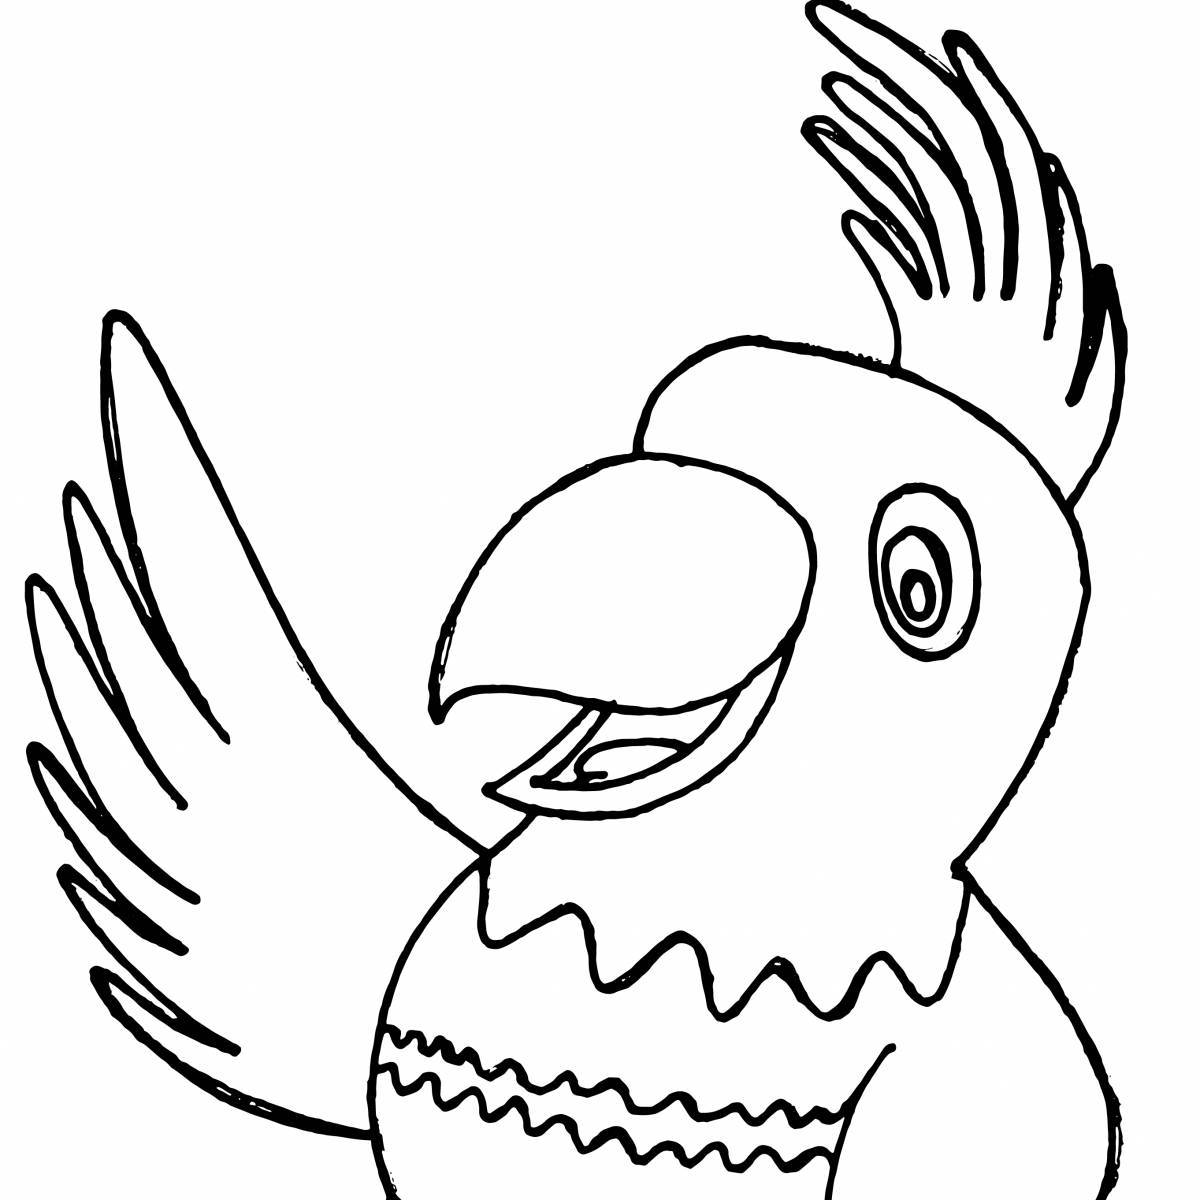 An interesting parrot coloring book for kids